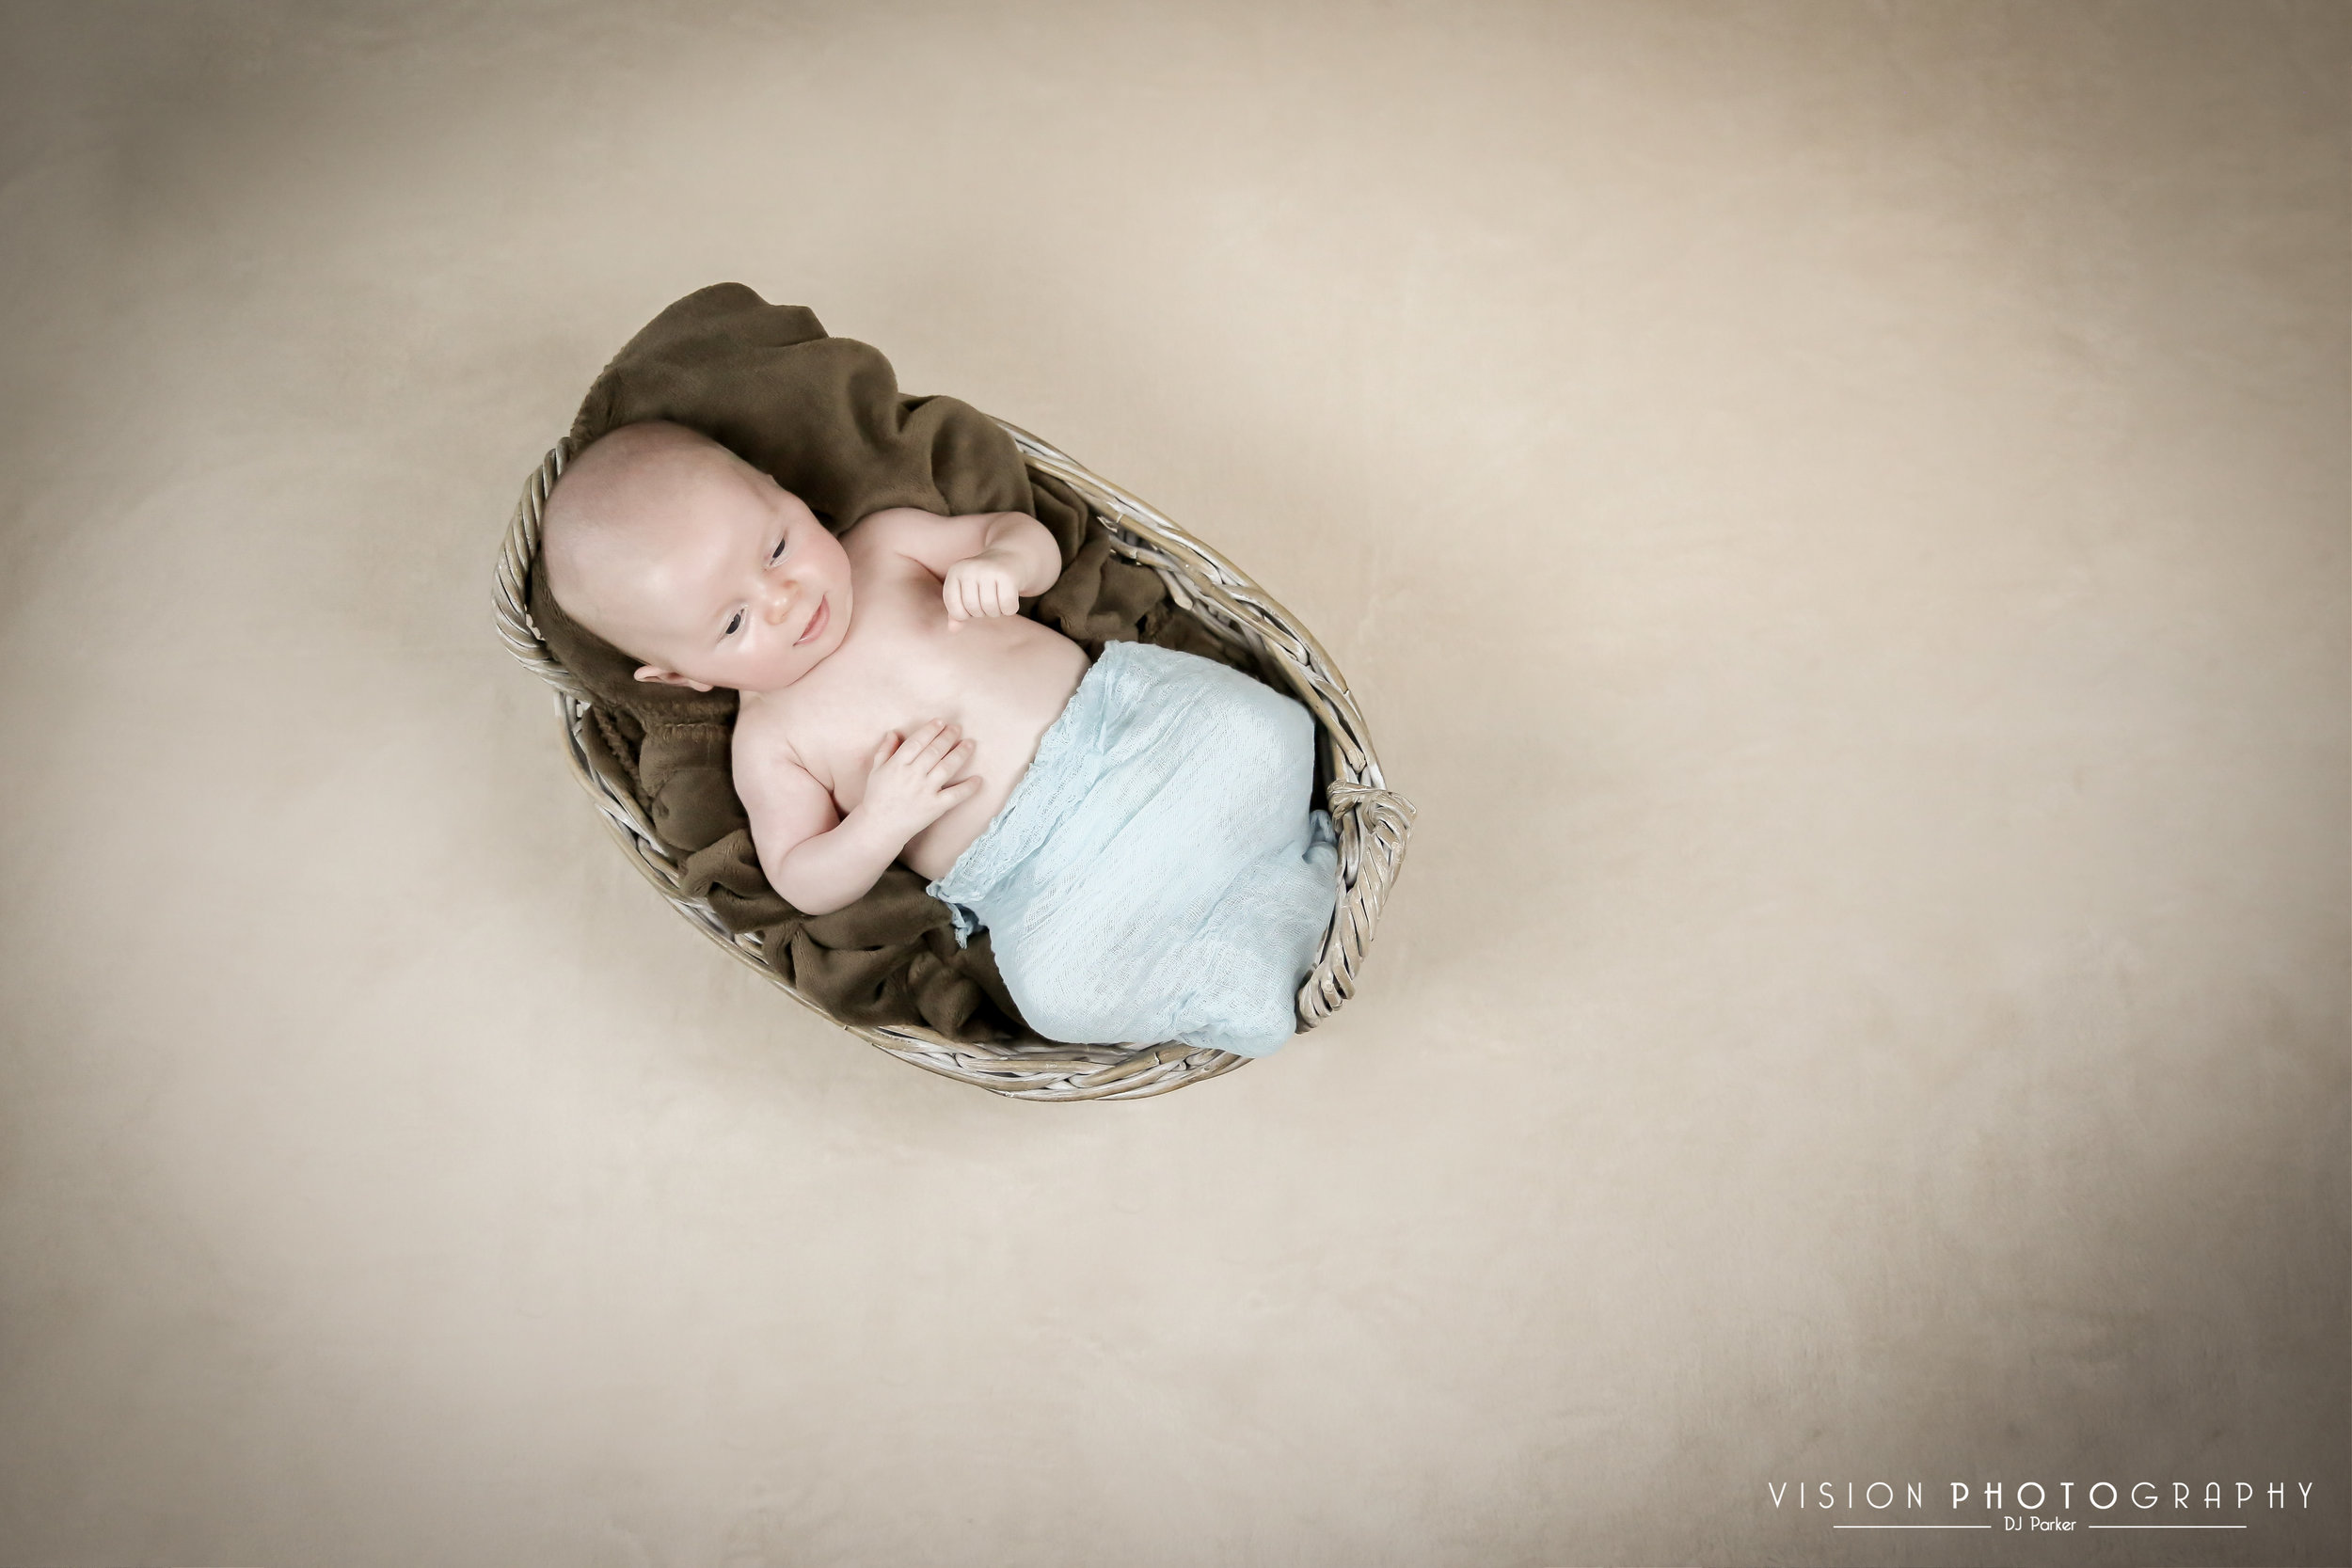 Copy of <strong>James</strong><a href="/james-newborn-portfolio">View Gallery »<a>